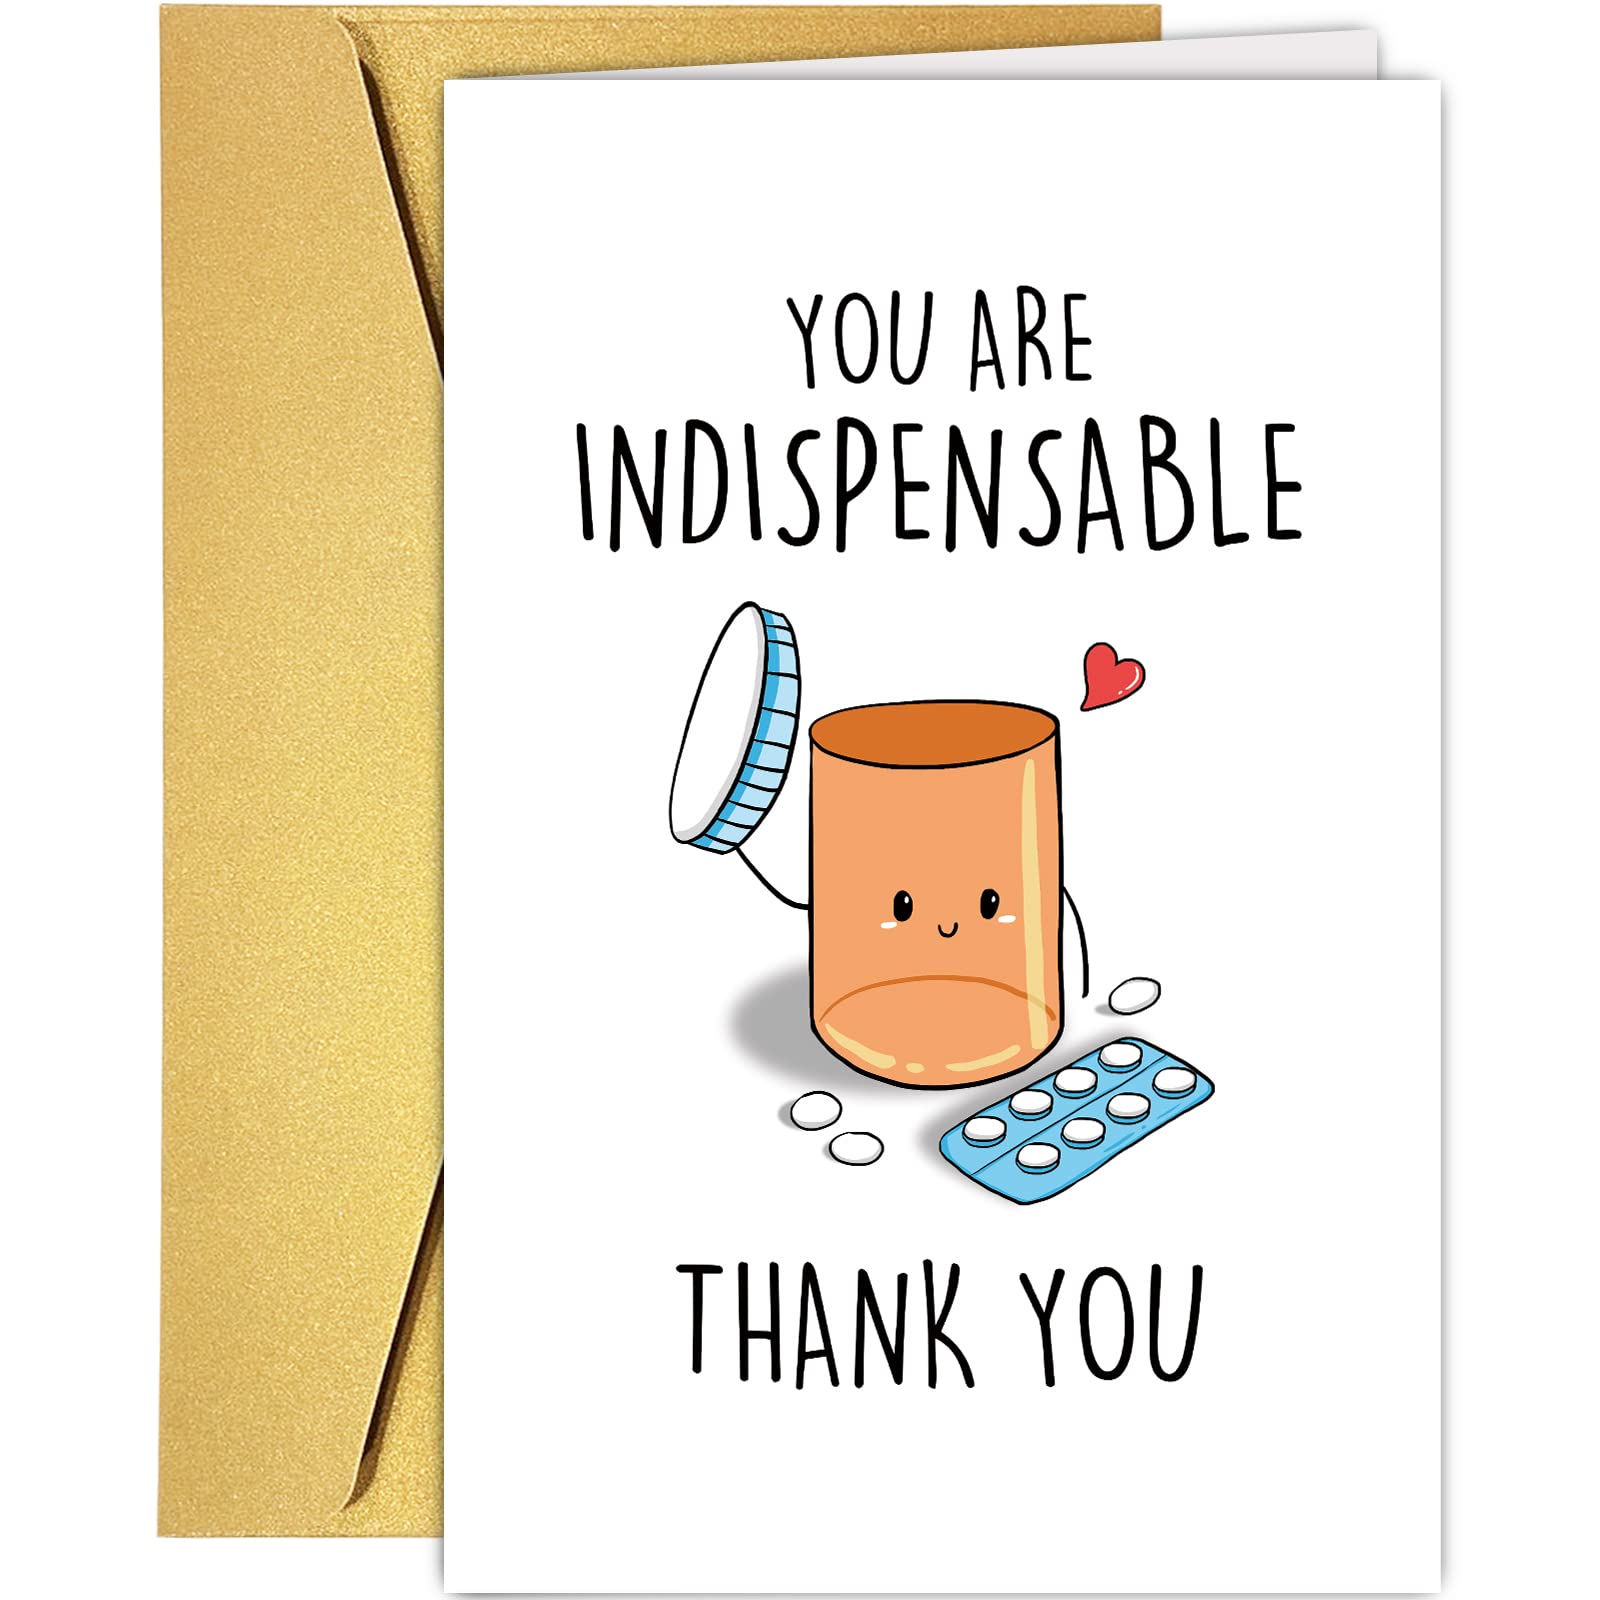 humorous thank you images